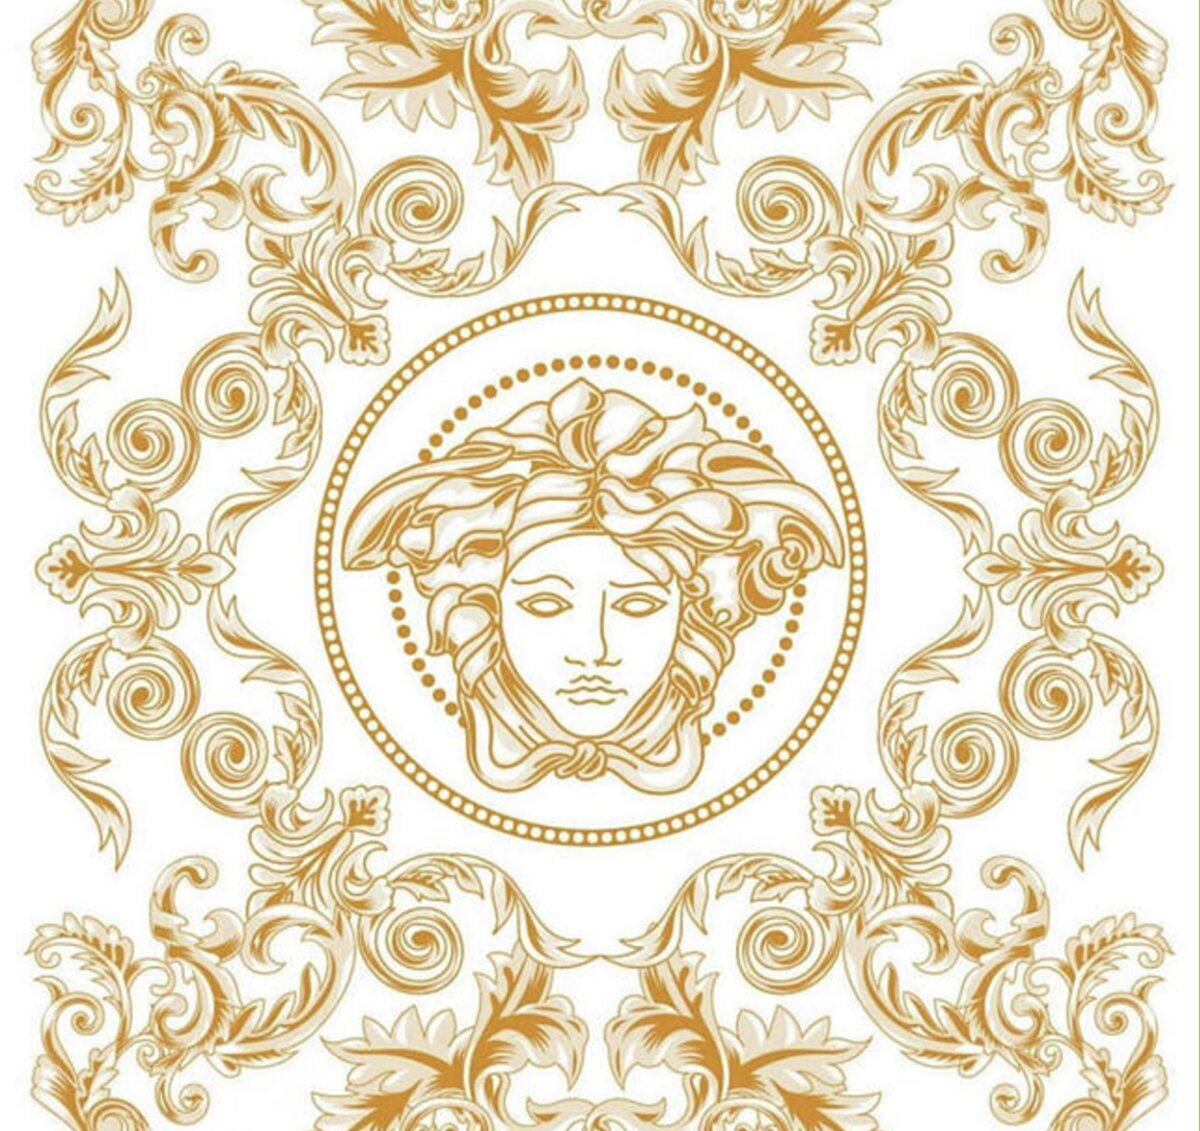 White and Gold Medusa Face Mask for Sale by Lexi Lux